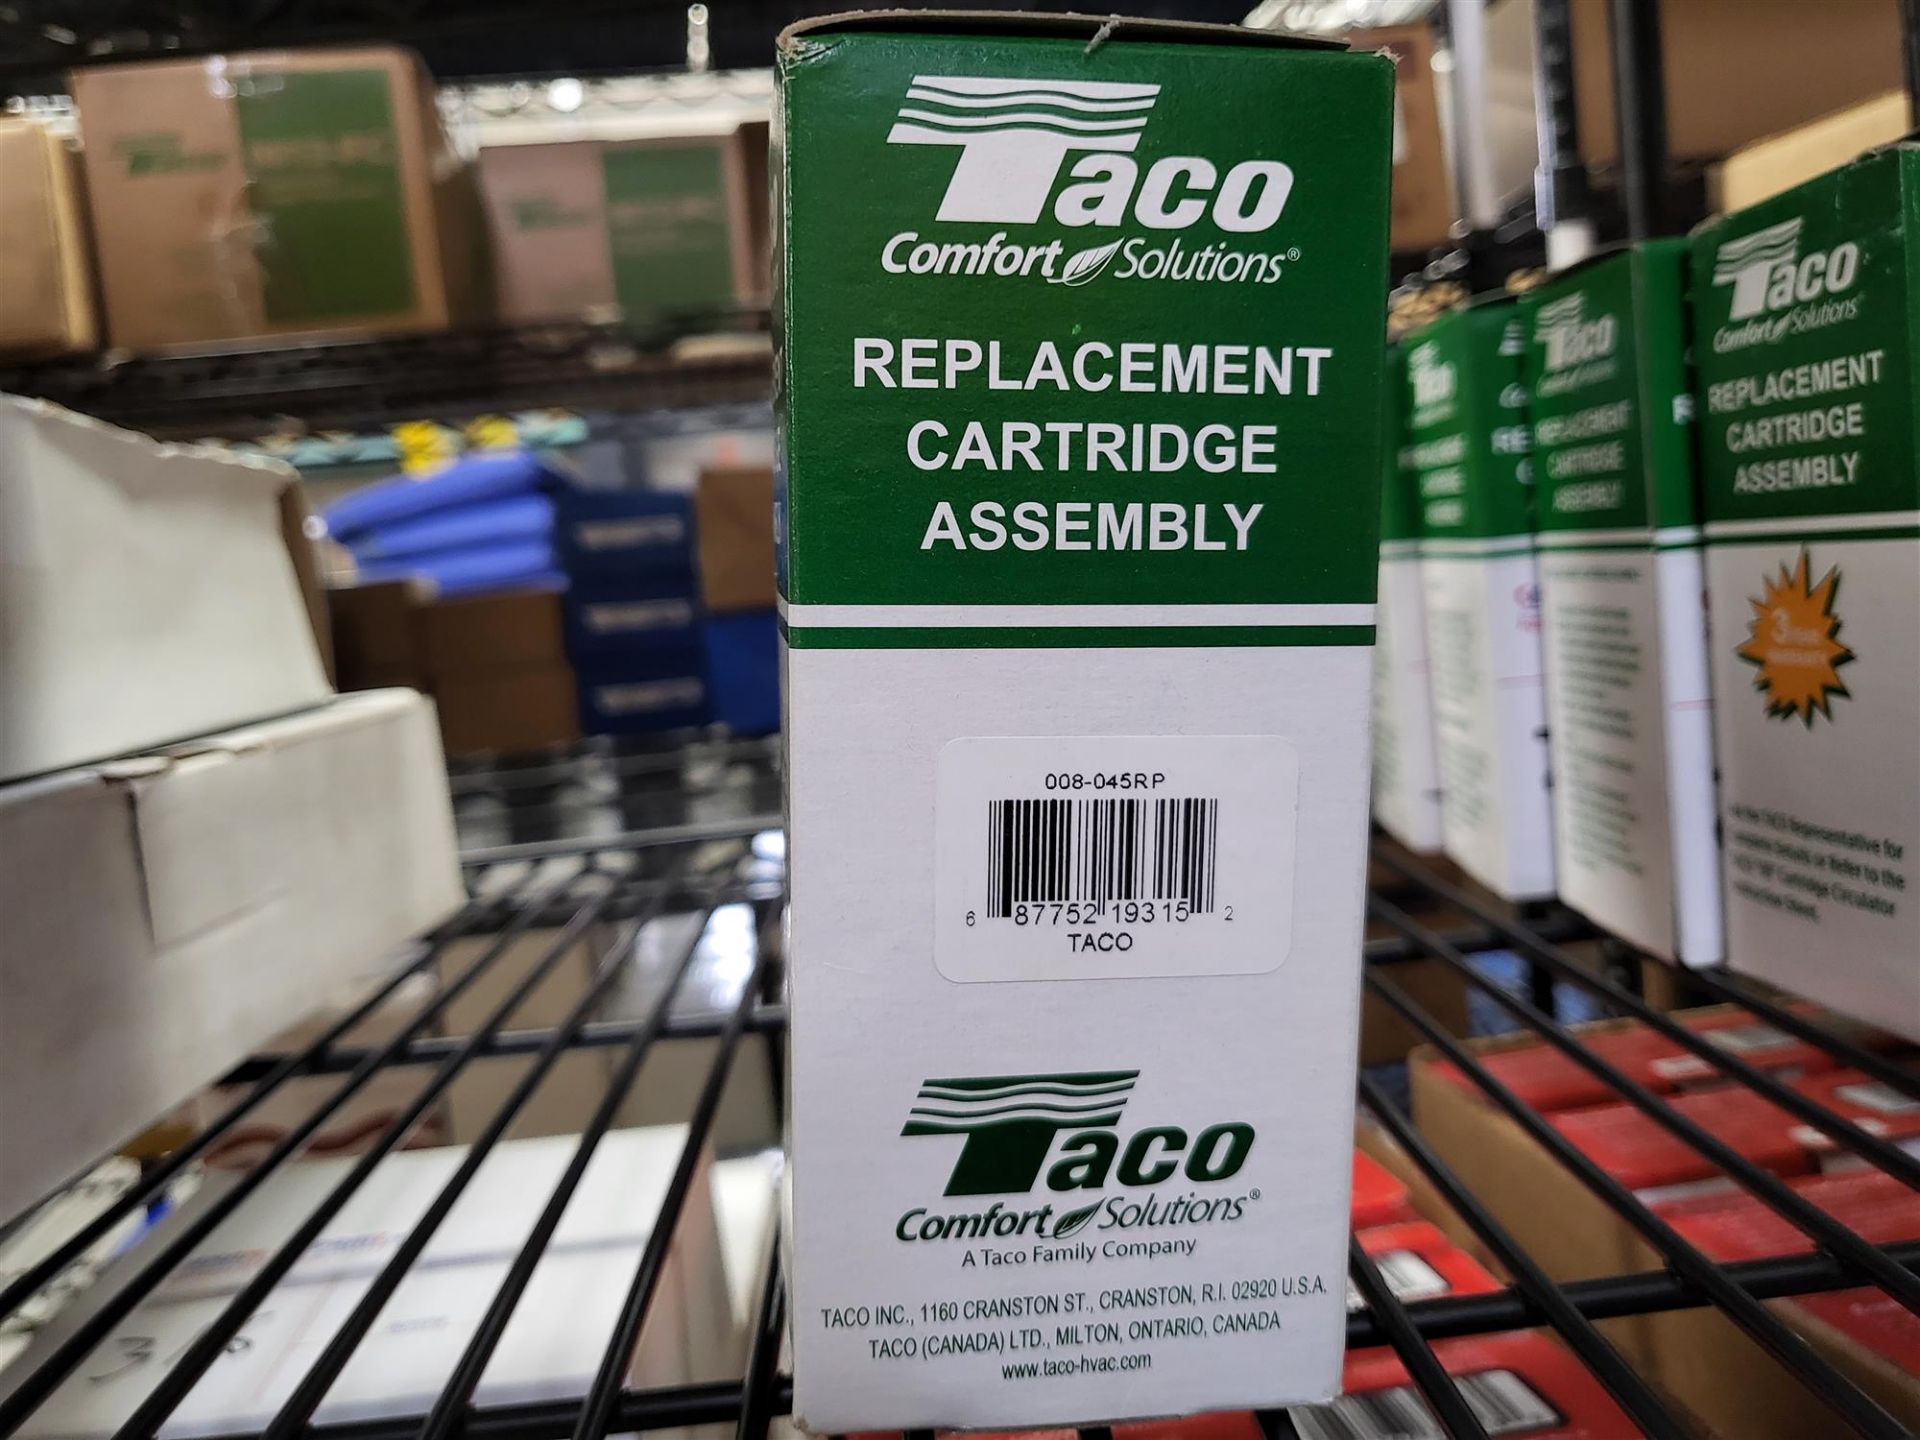 Taco Replacement Cartridge Assembly - 008-045RP - Image 2 of 2